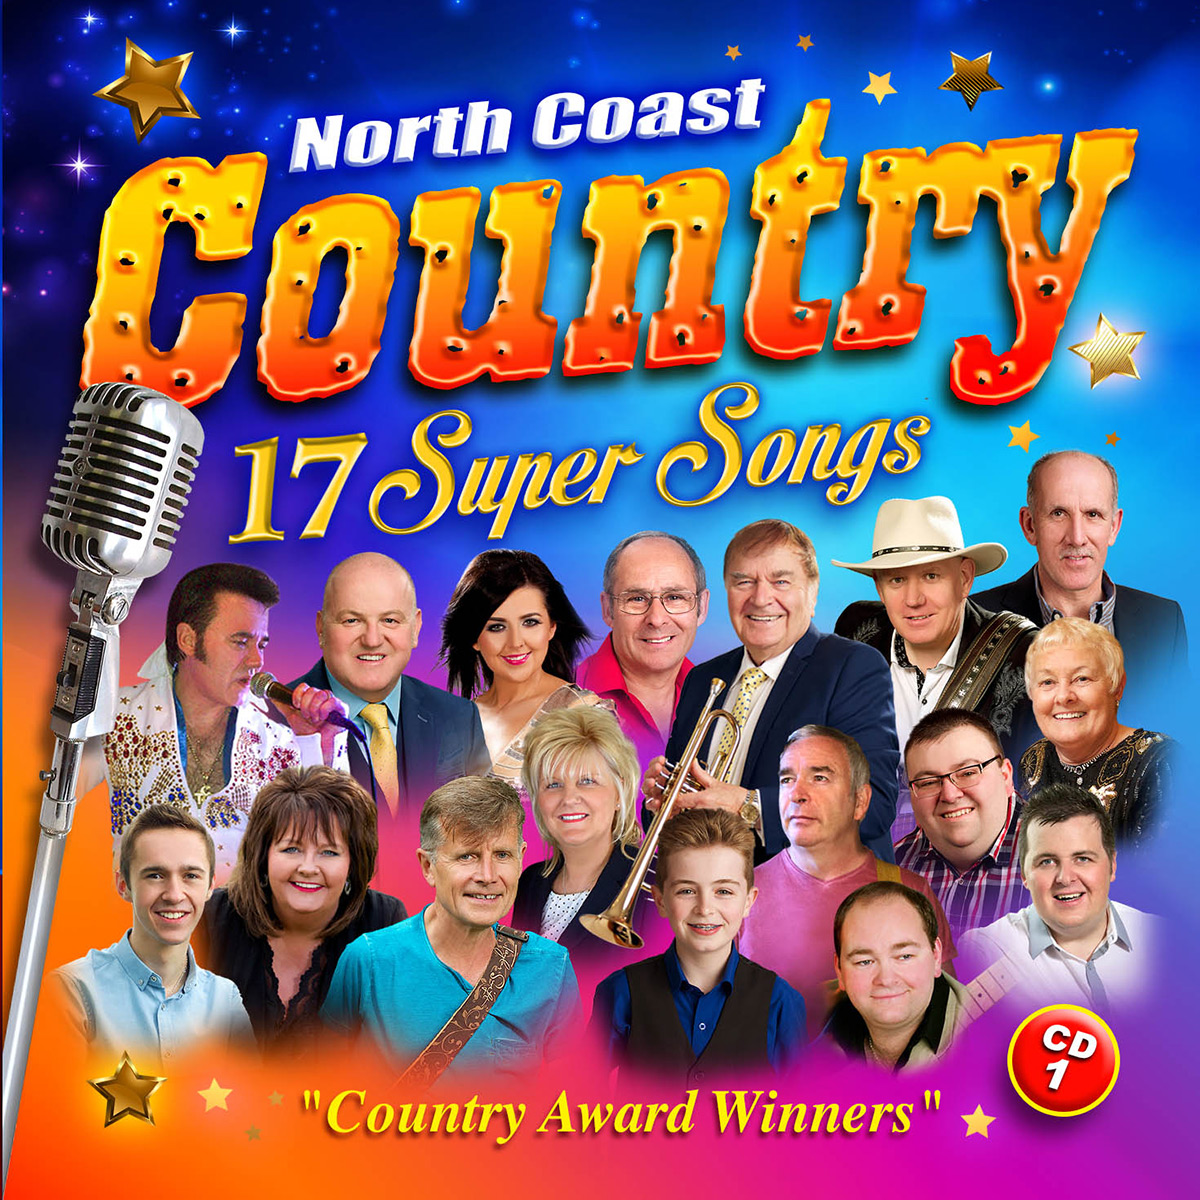 North Coast Country Music 17 Super Songs CD